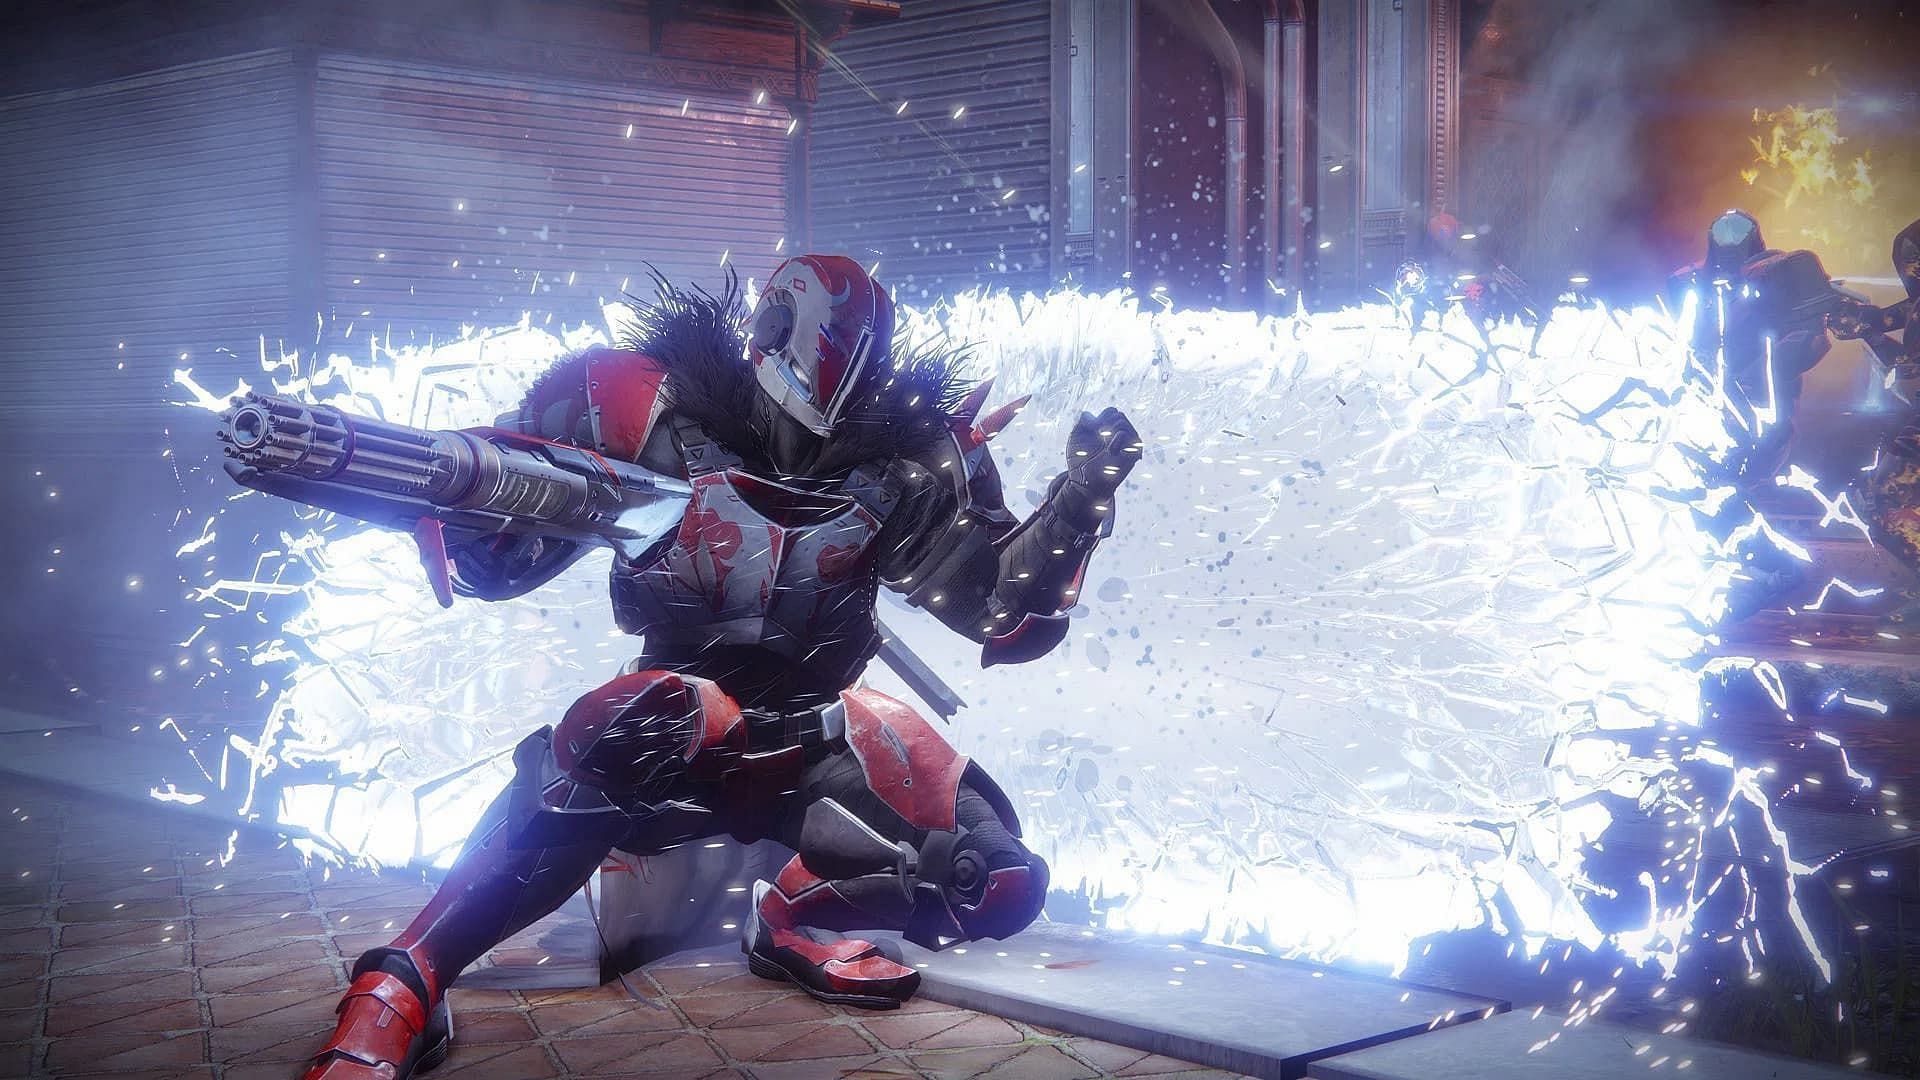 Titans received a small buff in the recent Destiny 2 hotfix. (Image via Bungie)